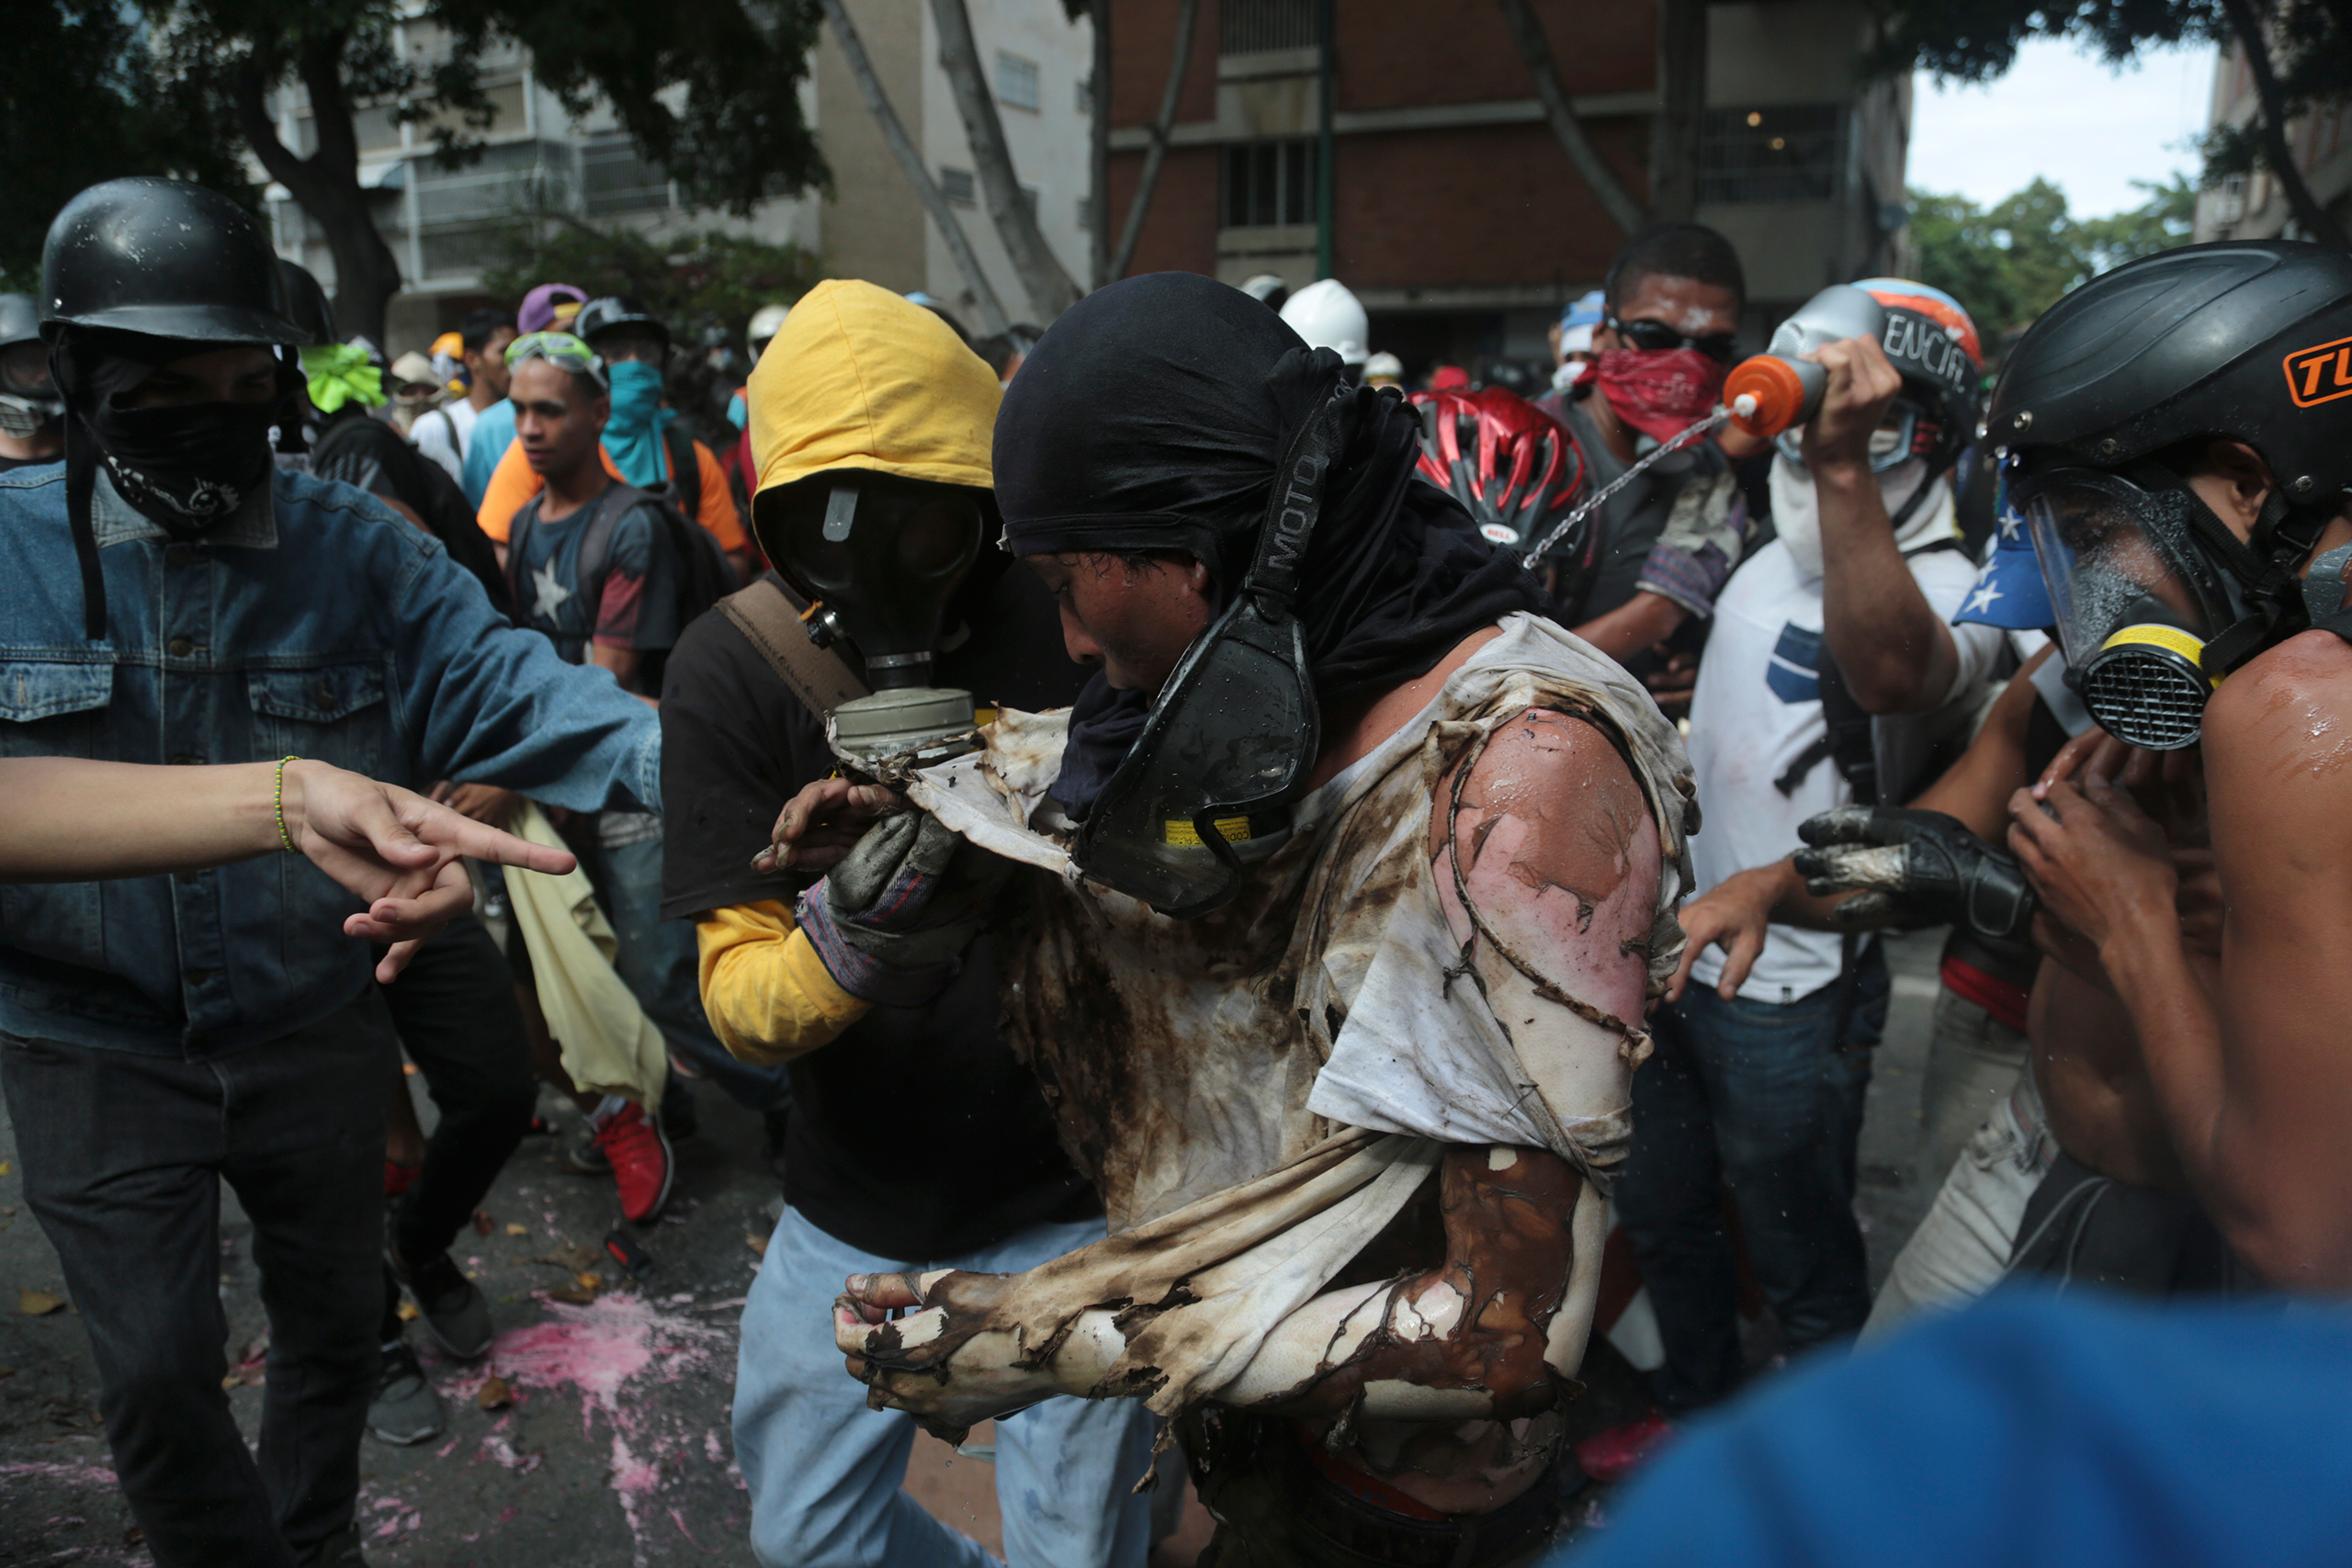 The man is aided by fellow protesters after he was burnt during a clash. (Fernando Llano—AP)